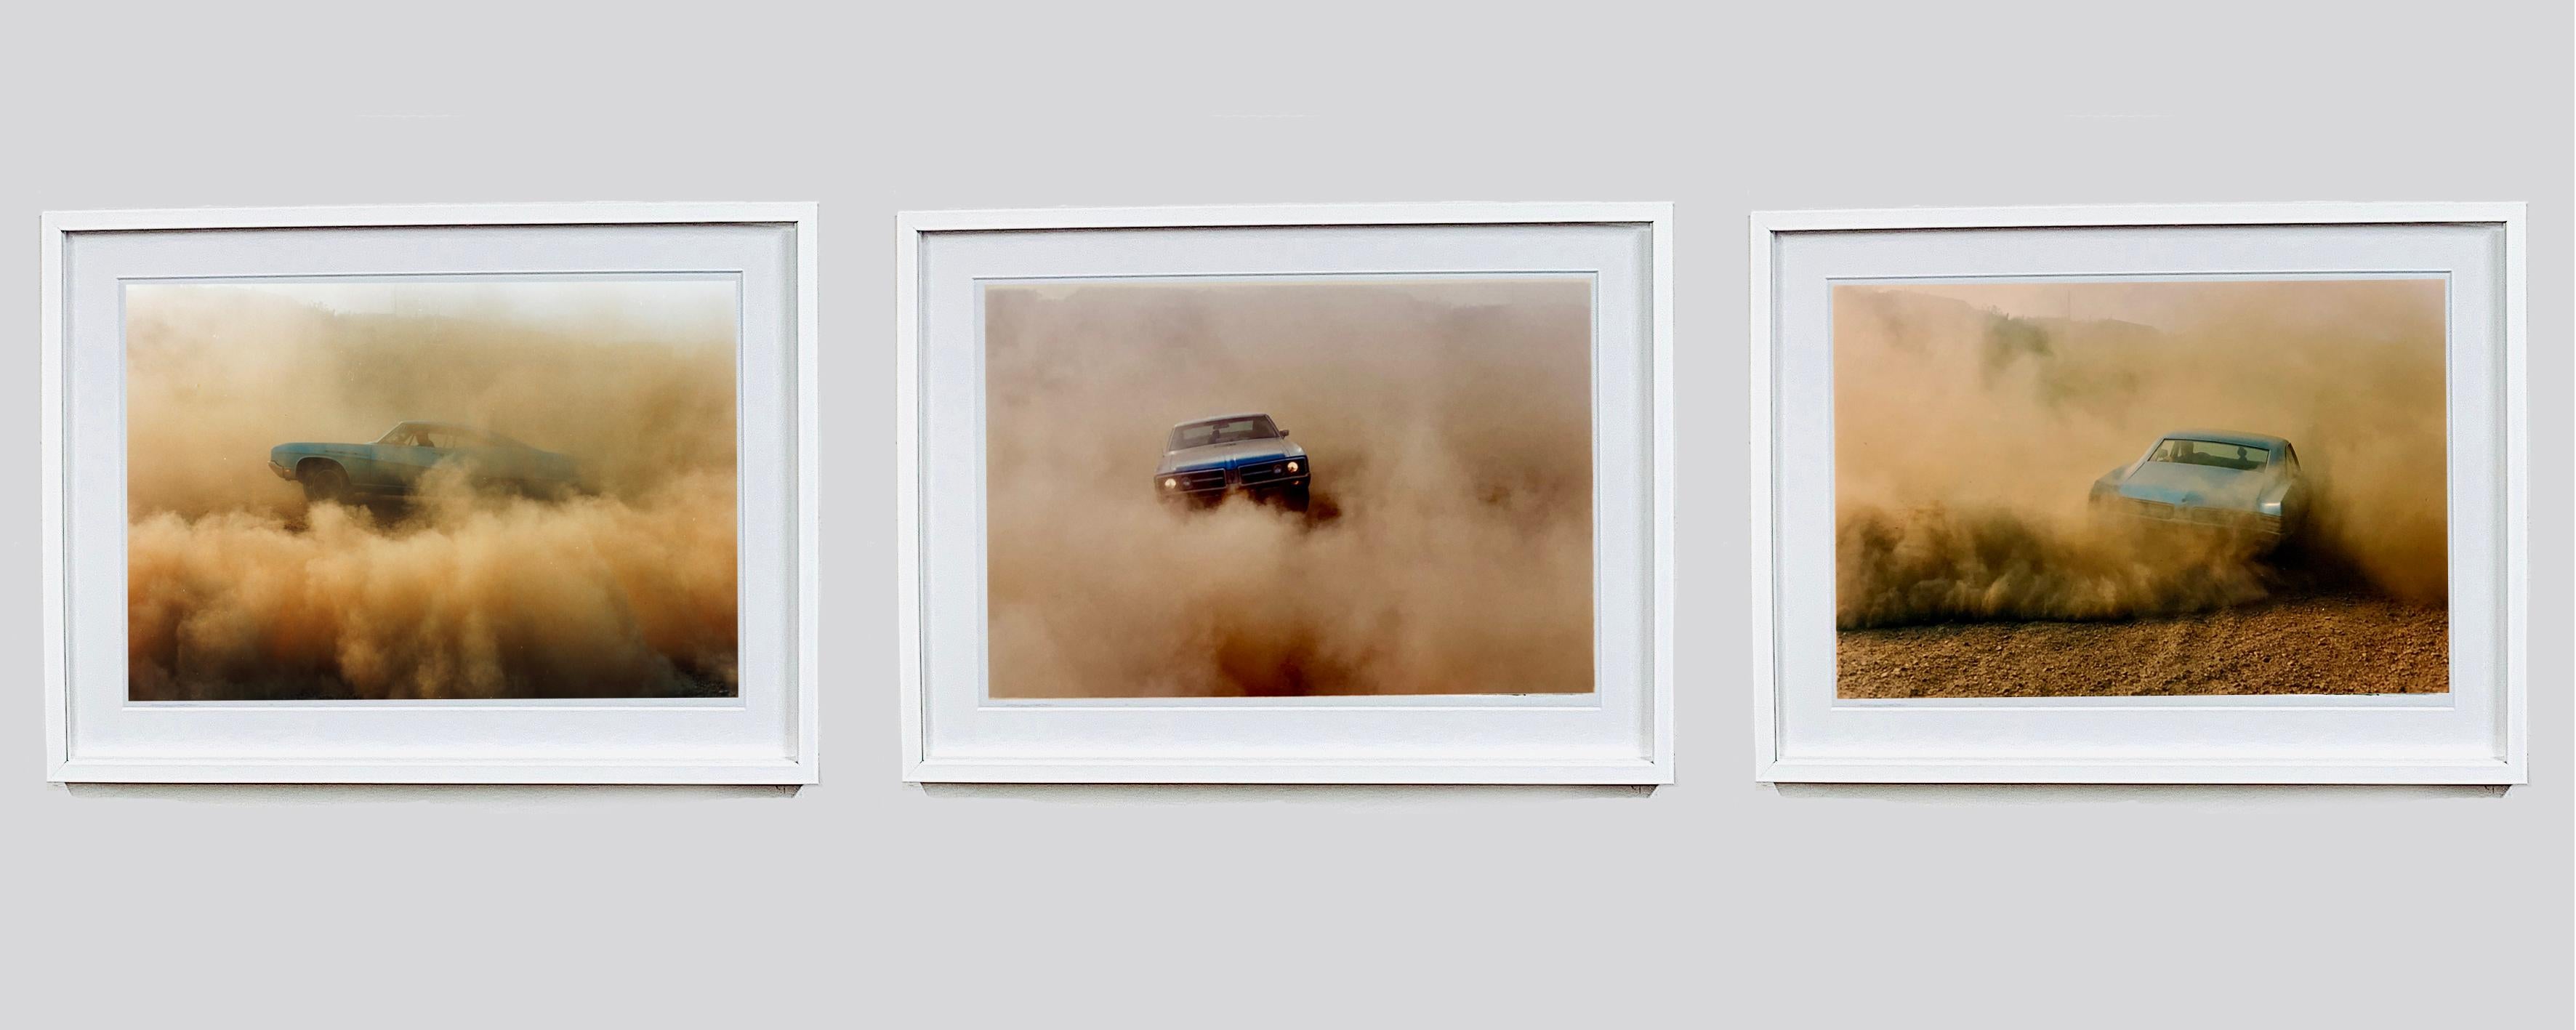 Buick in the Dust I, Hemsby, Norfolk - Color Photography of a Car - Contemporary Print by Richard Heeps